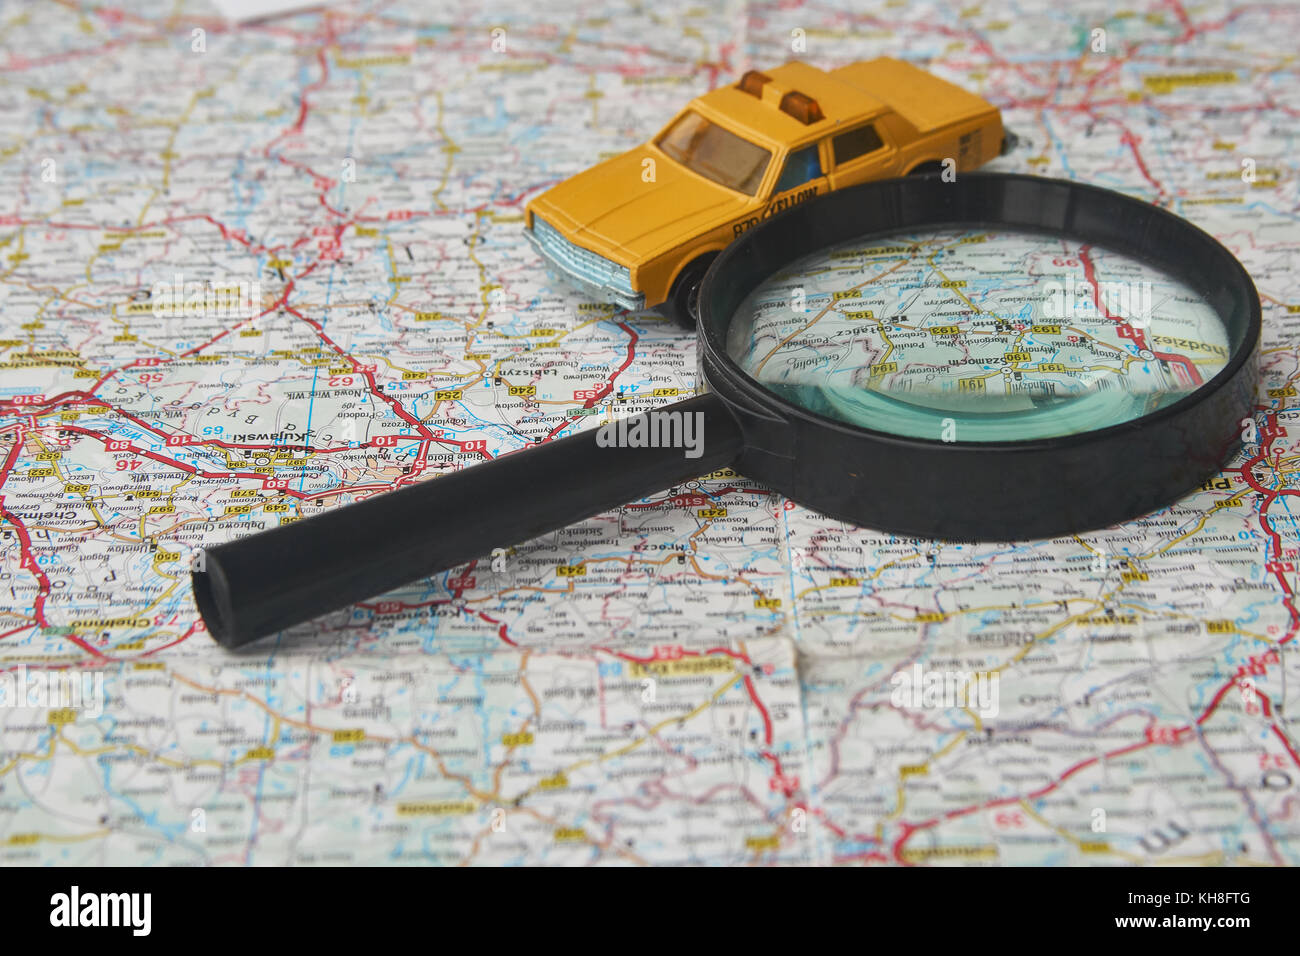 Magnifying glass and toy car on a map Stock Photo